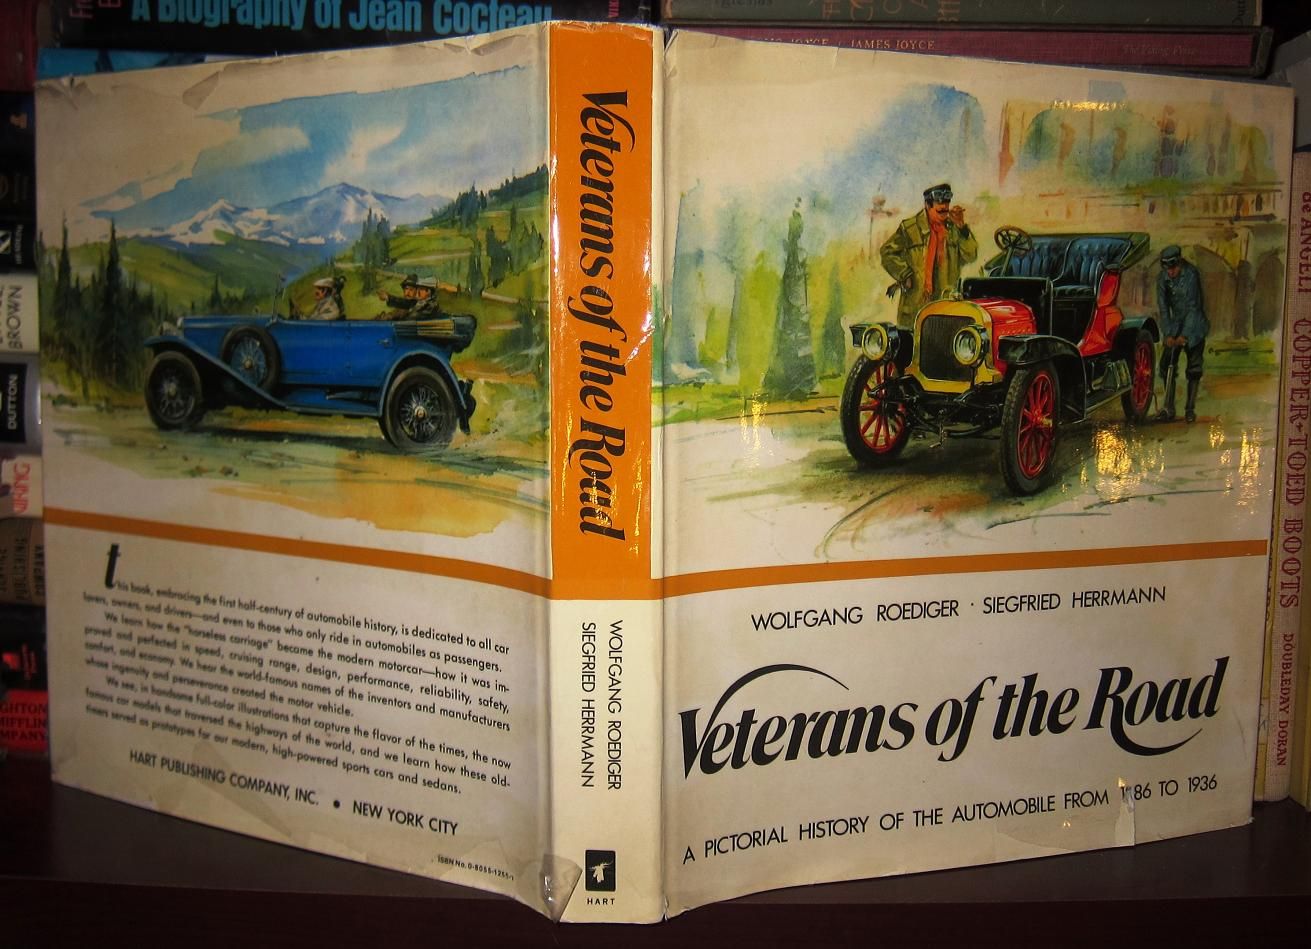 ROEDIGER, WOLFGANG; HERRMANN, SIEGFRIED - Veterans of the Road a Pictorial History of the Automobile. Tr from the German by C.S. V. Salt